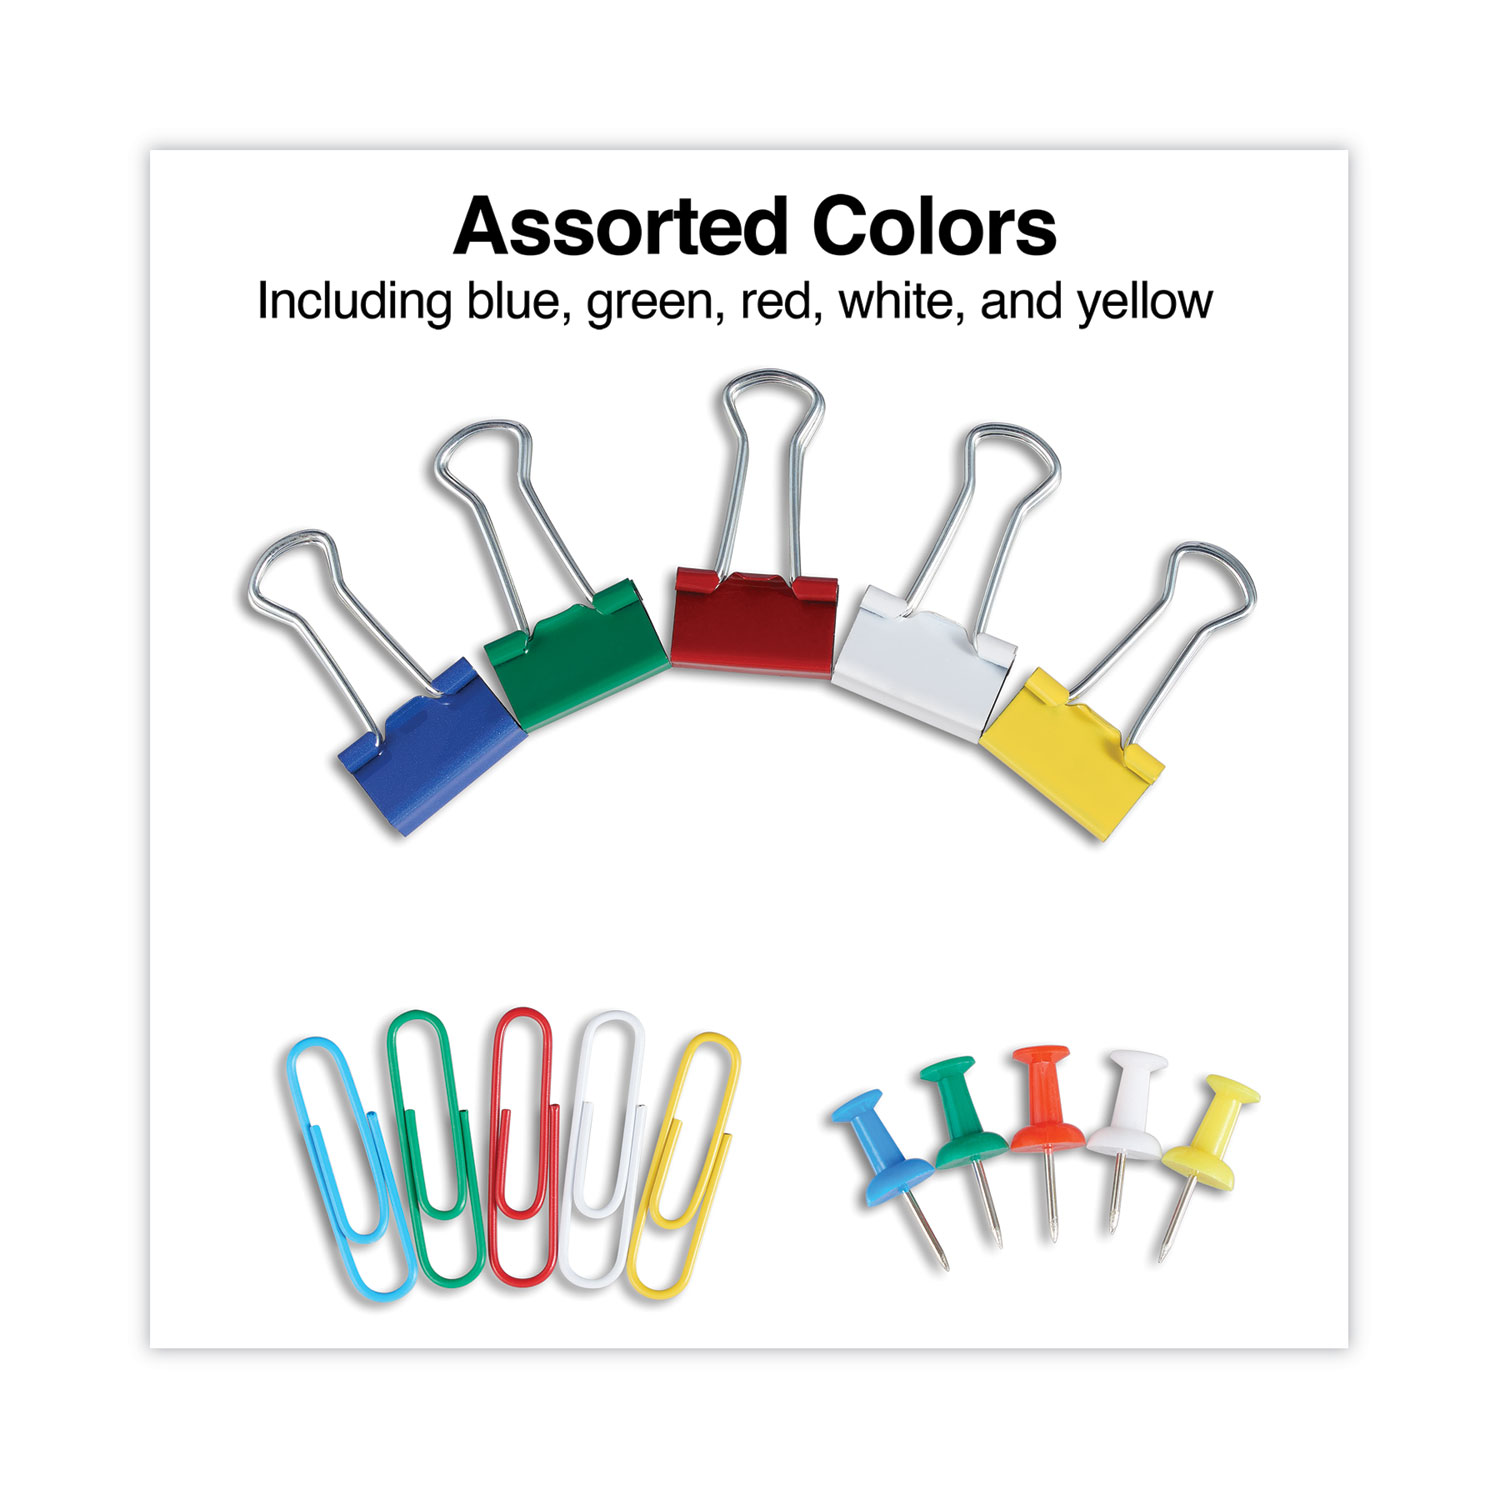 Paper Clamps Assorted 3 Sizes Paper Binder Clips Metal Fold Back Clips with Box Assorted Colors for Office,School and Home Supplies Push Pins 280 Pcs Binder Clips Paper Clips Assorted 2 Sizes 